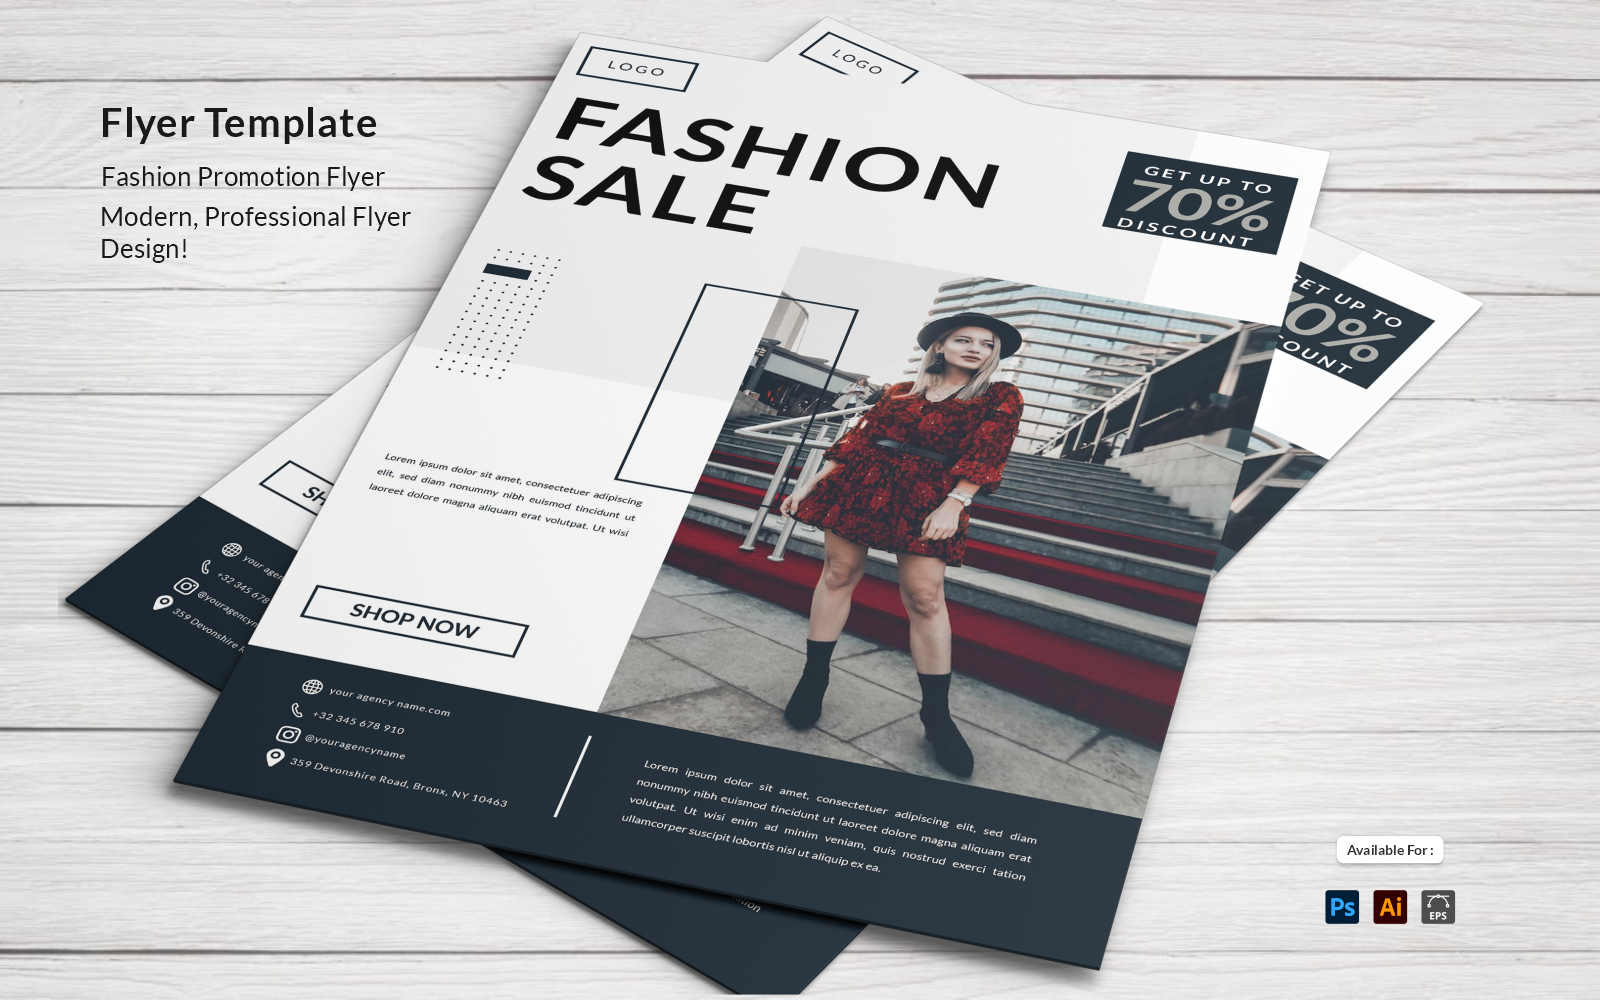 Fashion Promotion Flyer Template